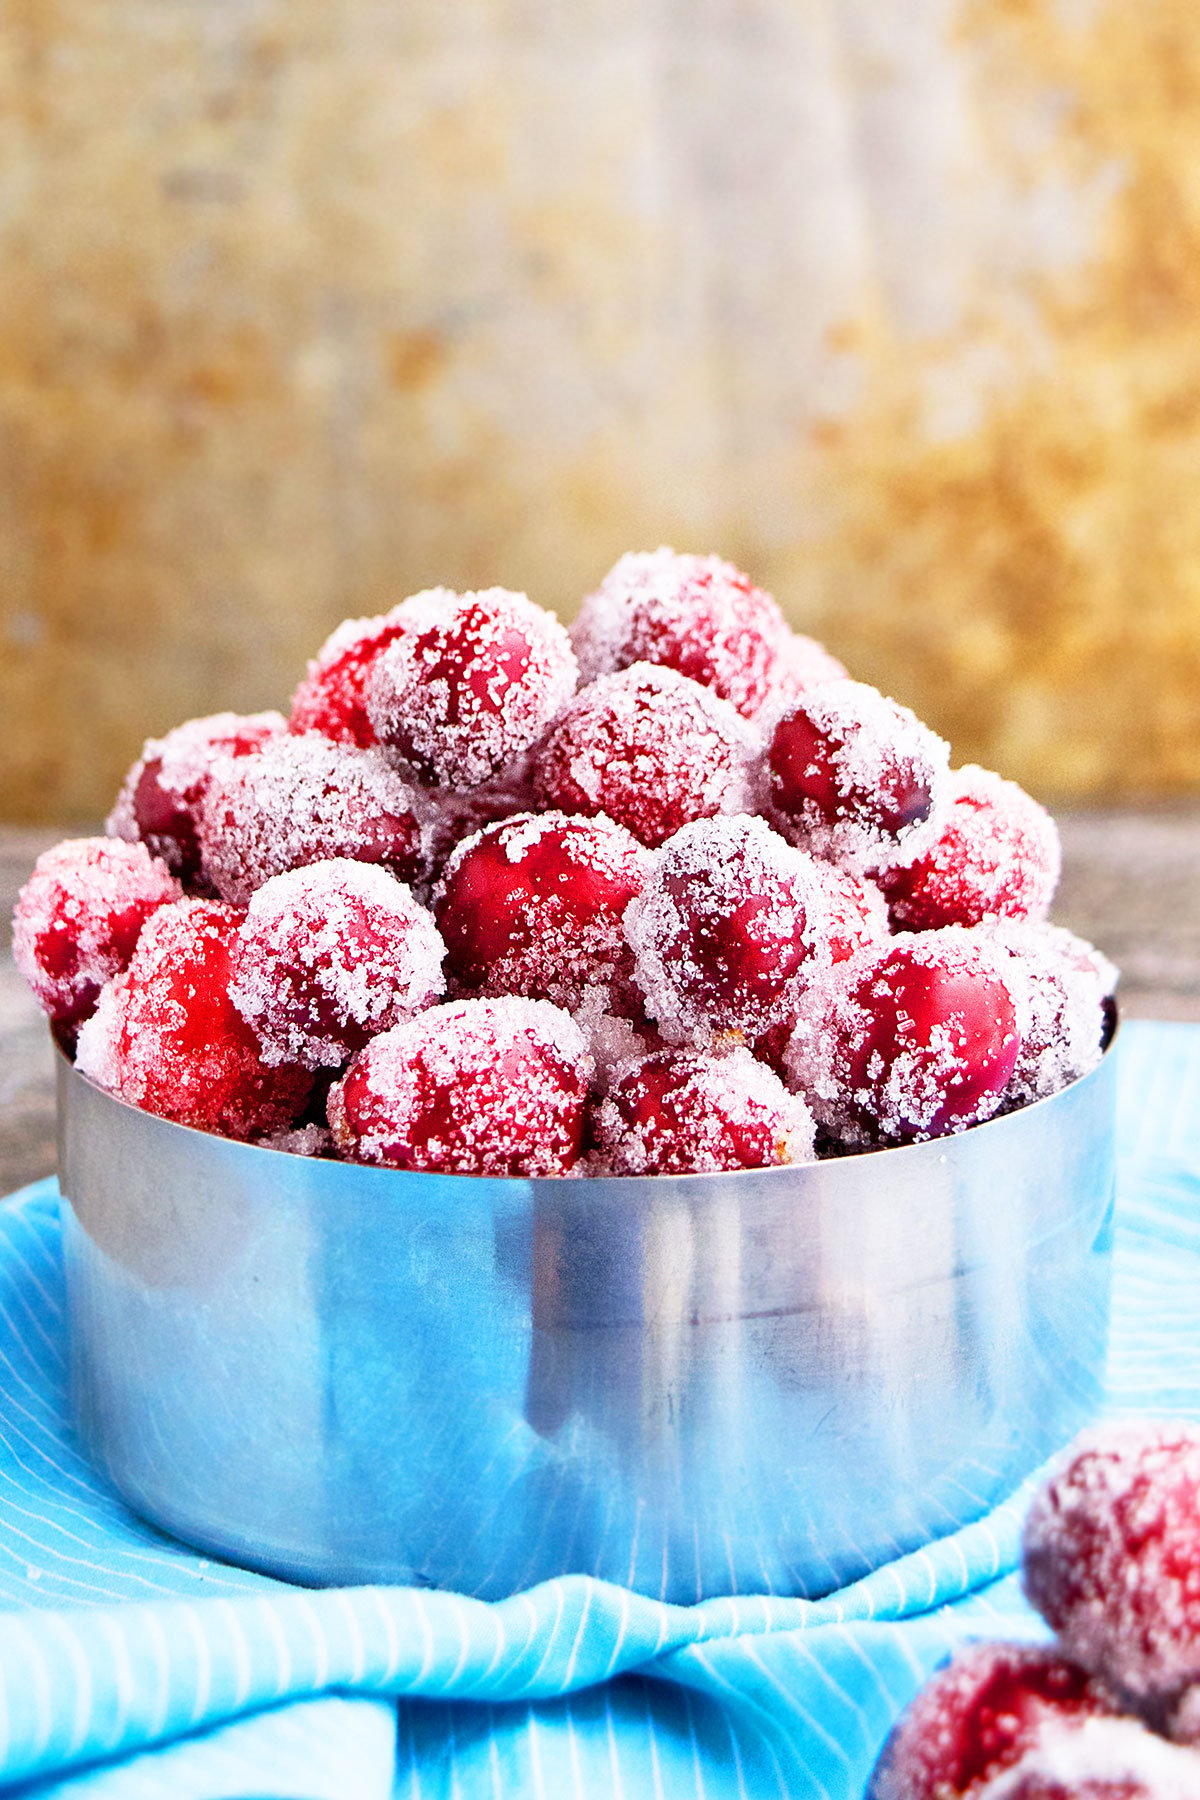 Easy Sugared Cranberries in Metallic Bowl on Blue Cloth. 